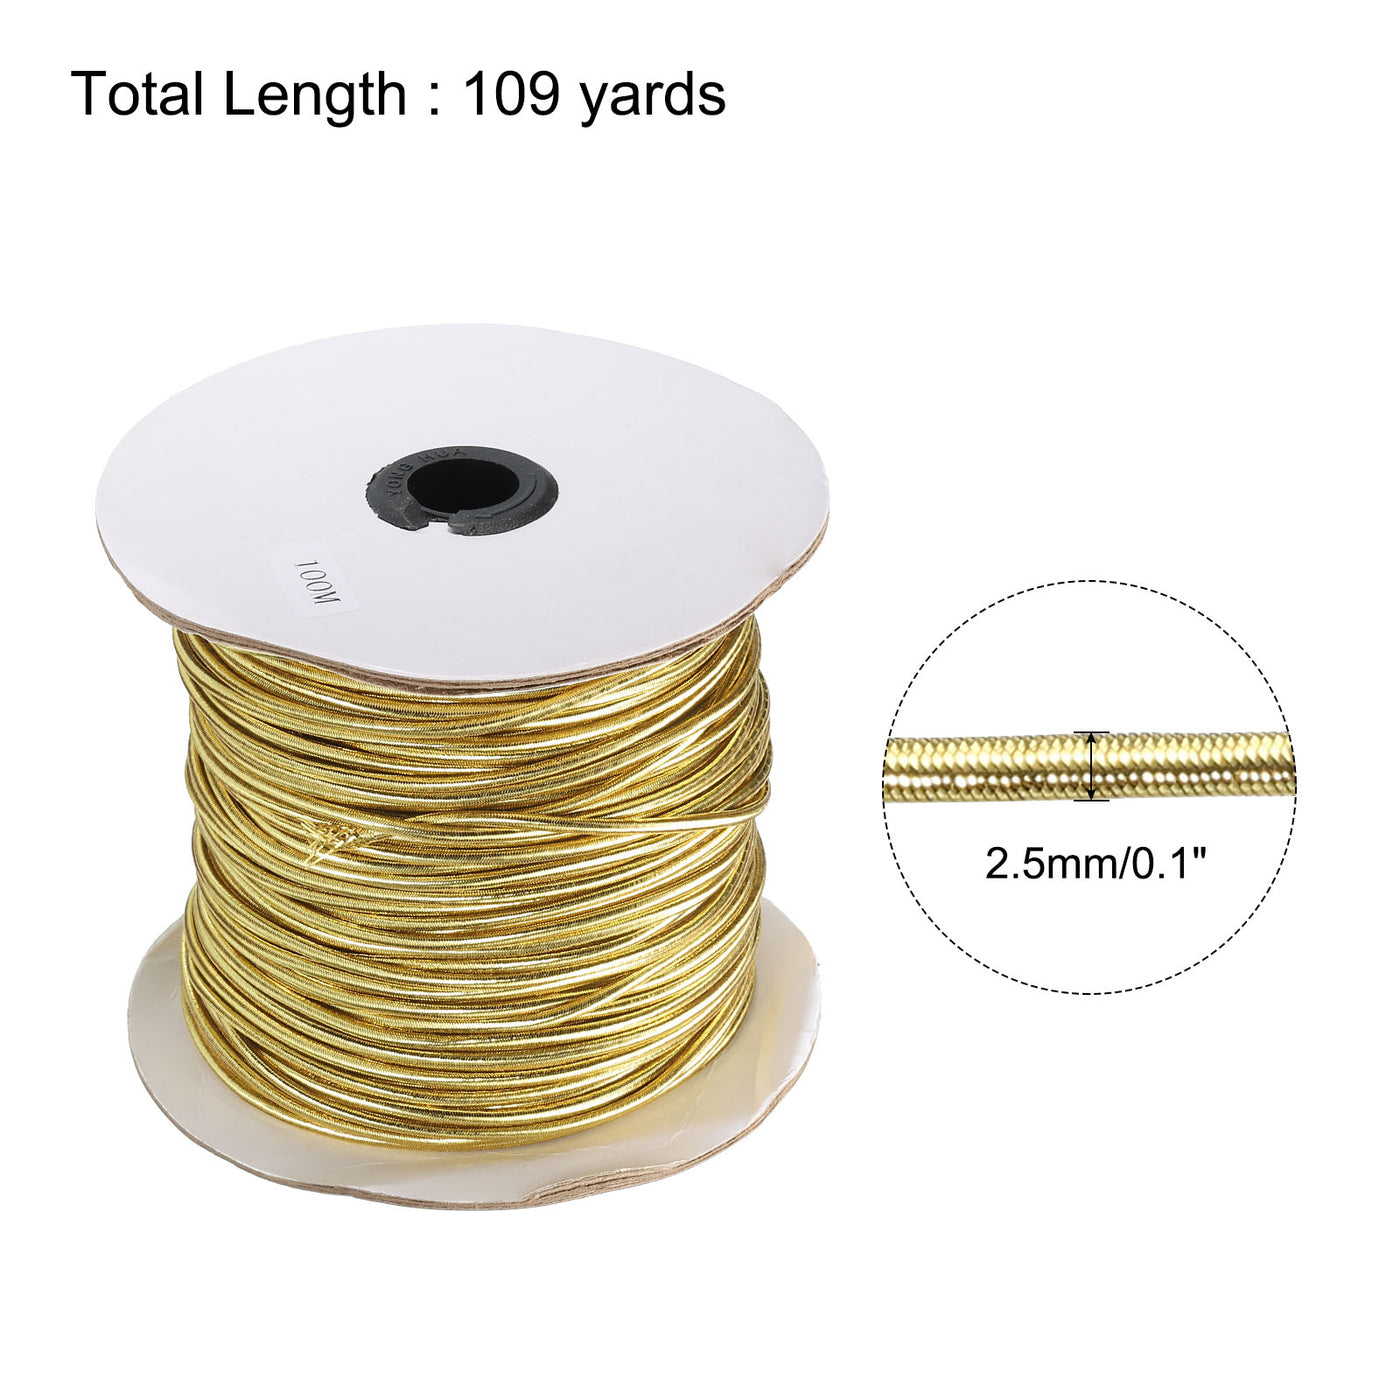 Harfington Elastic Cord Heavy Stretch String Rope 2.5mm 109 Yards for Crafting DIY Sewing Hook Straps Camping Tie Down Strap Gold